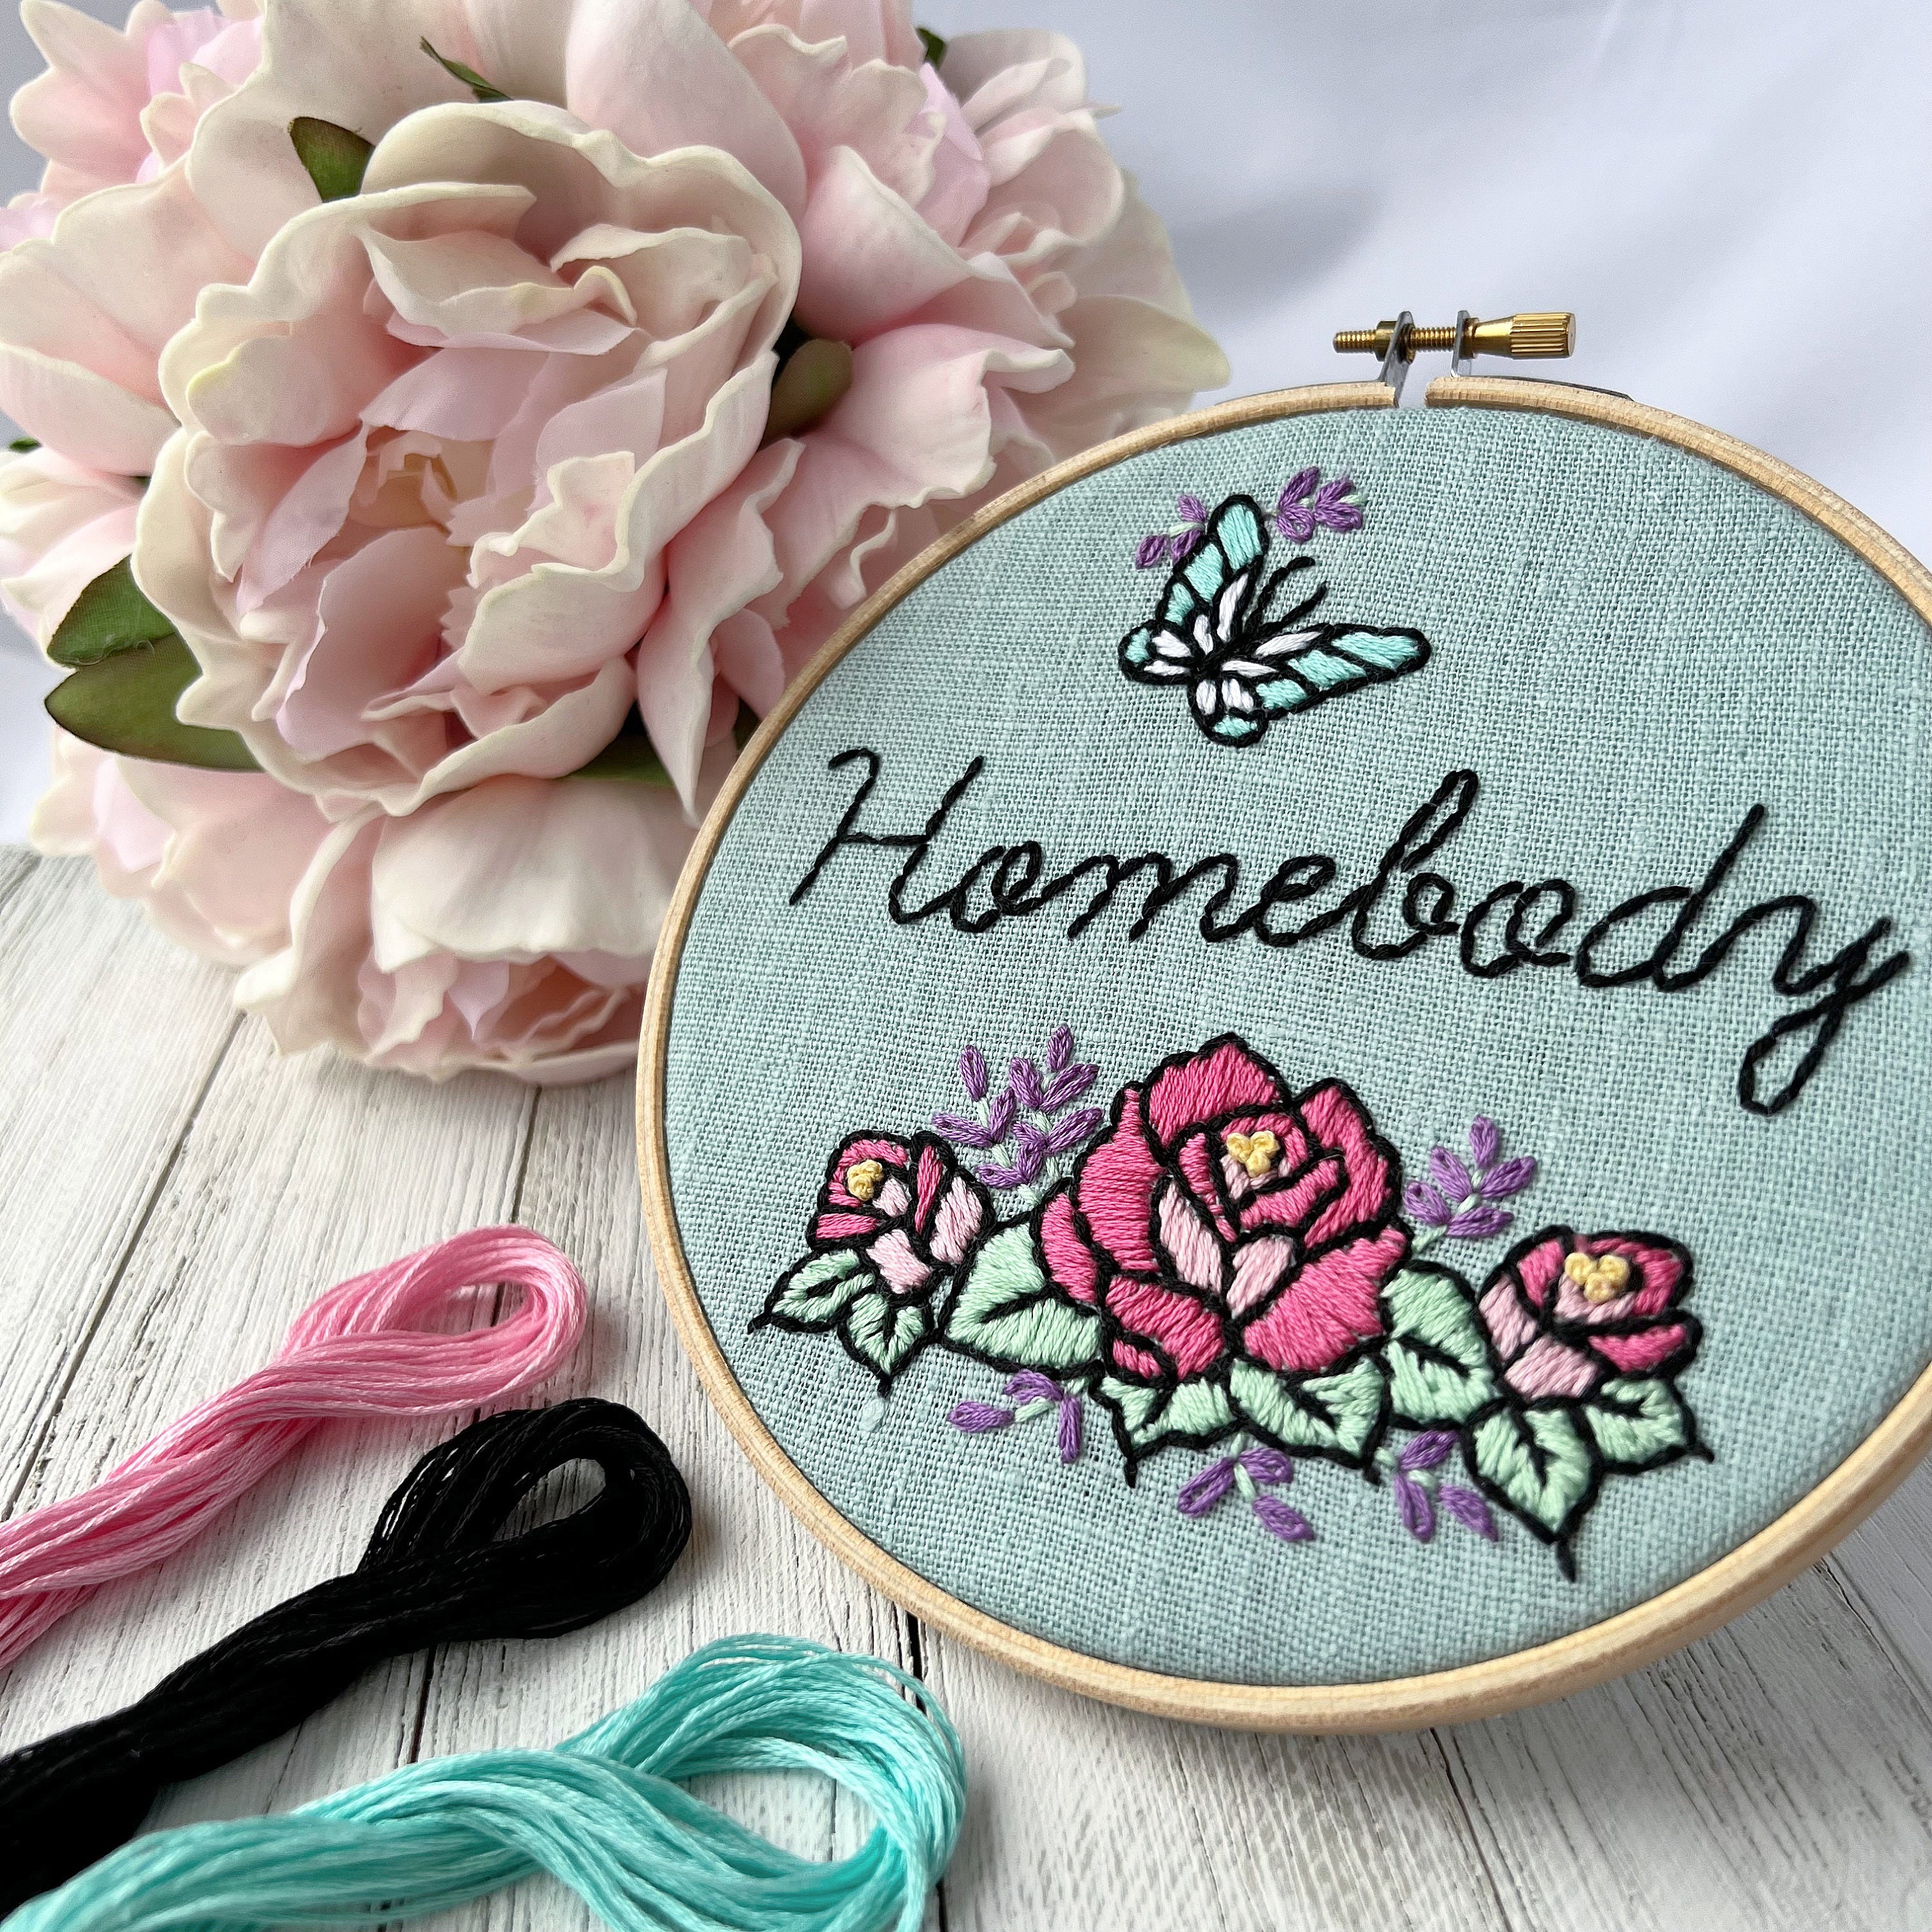 Beginner Embroidery Kits for Adults Flowers and Succulents